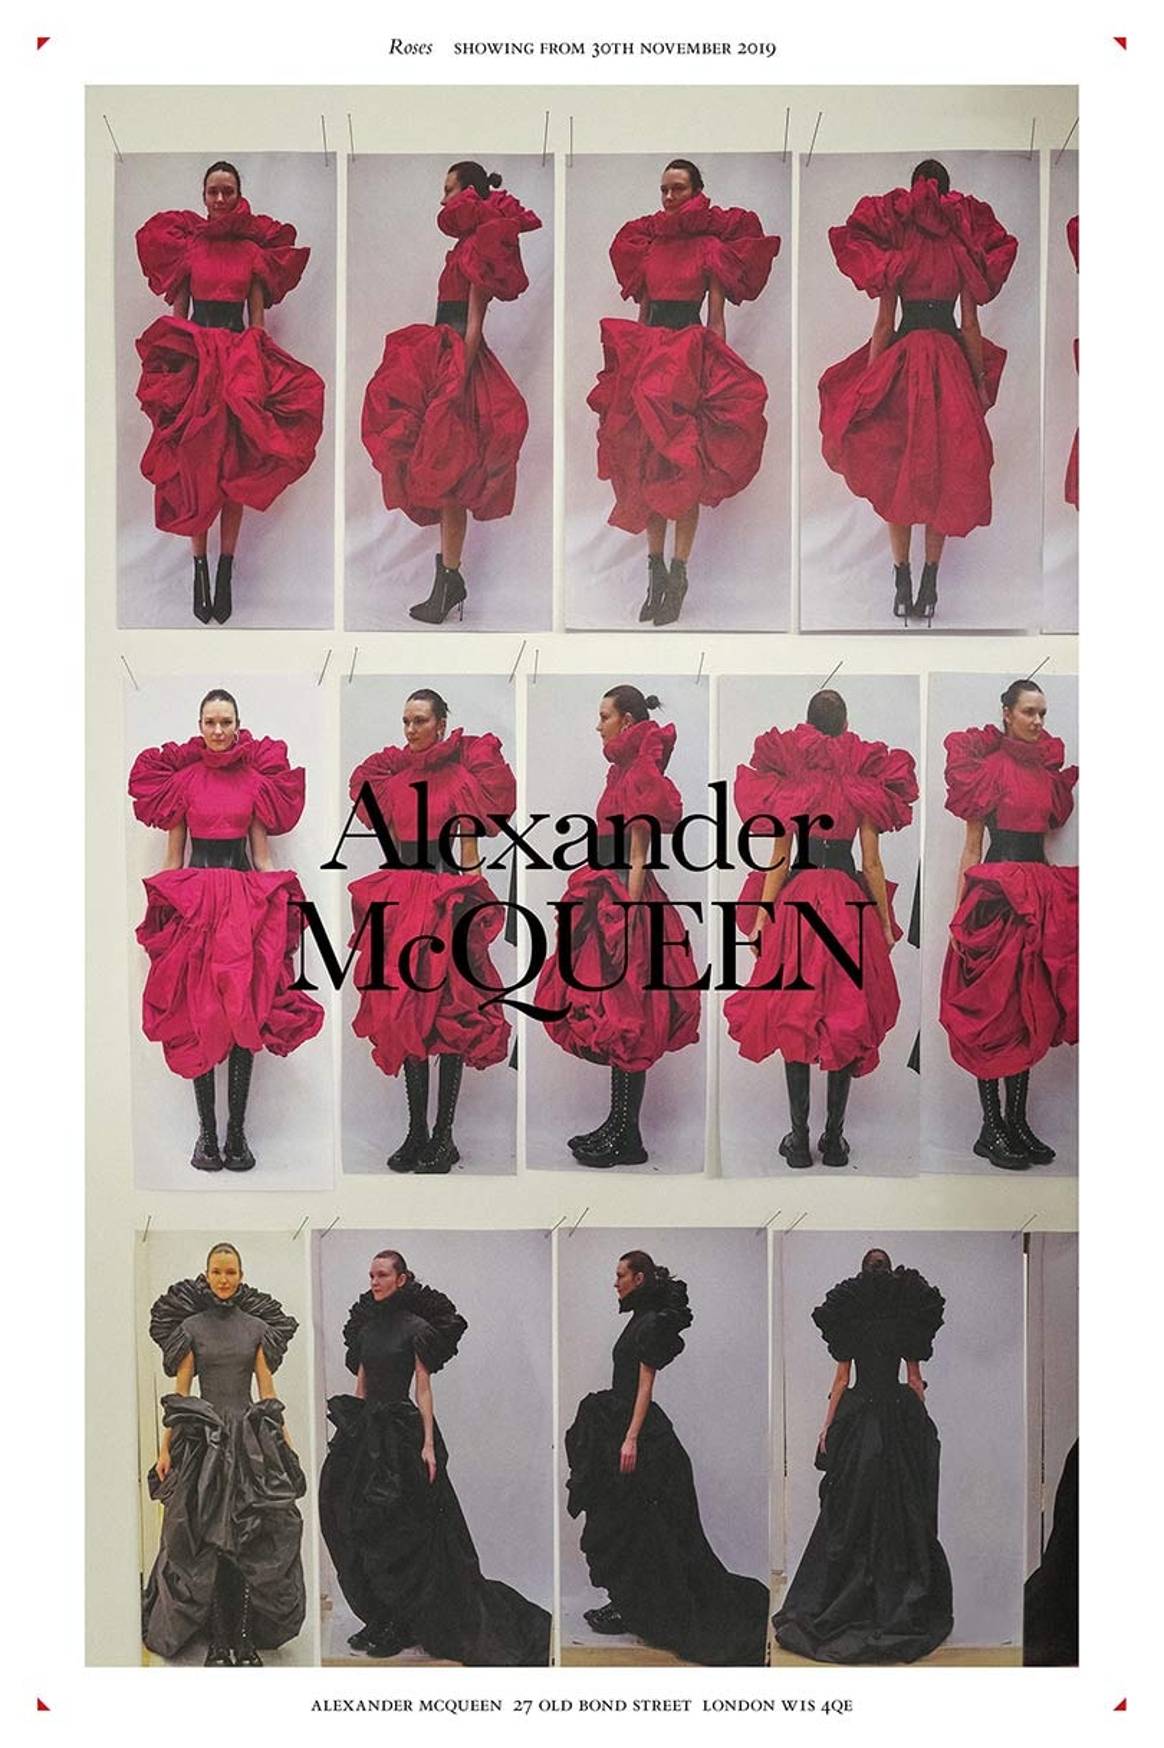 Alexander McQueen opens ‘Roses’ exhibition at London flagship